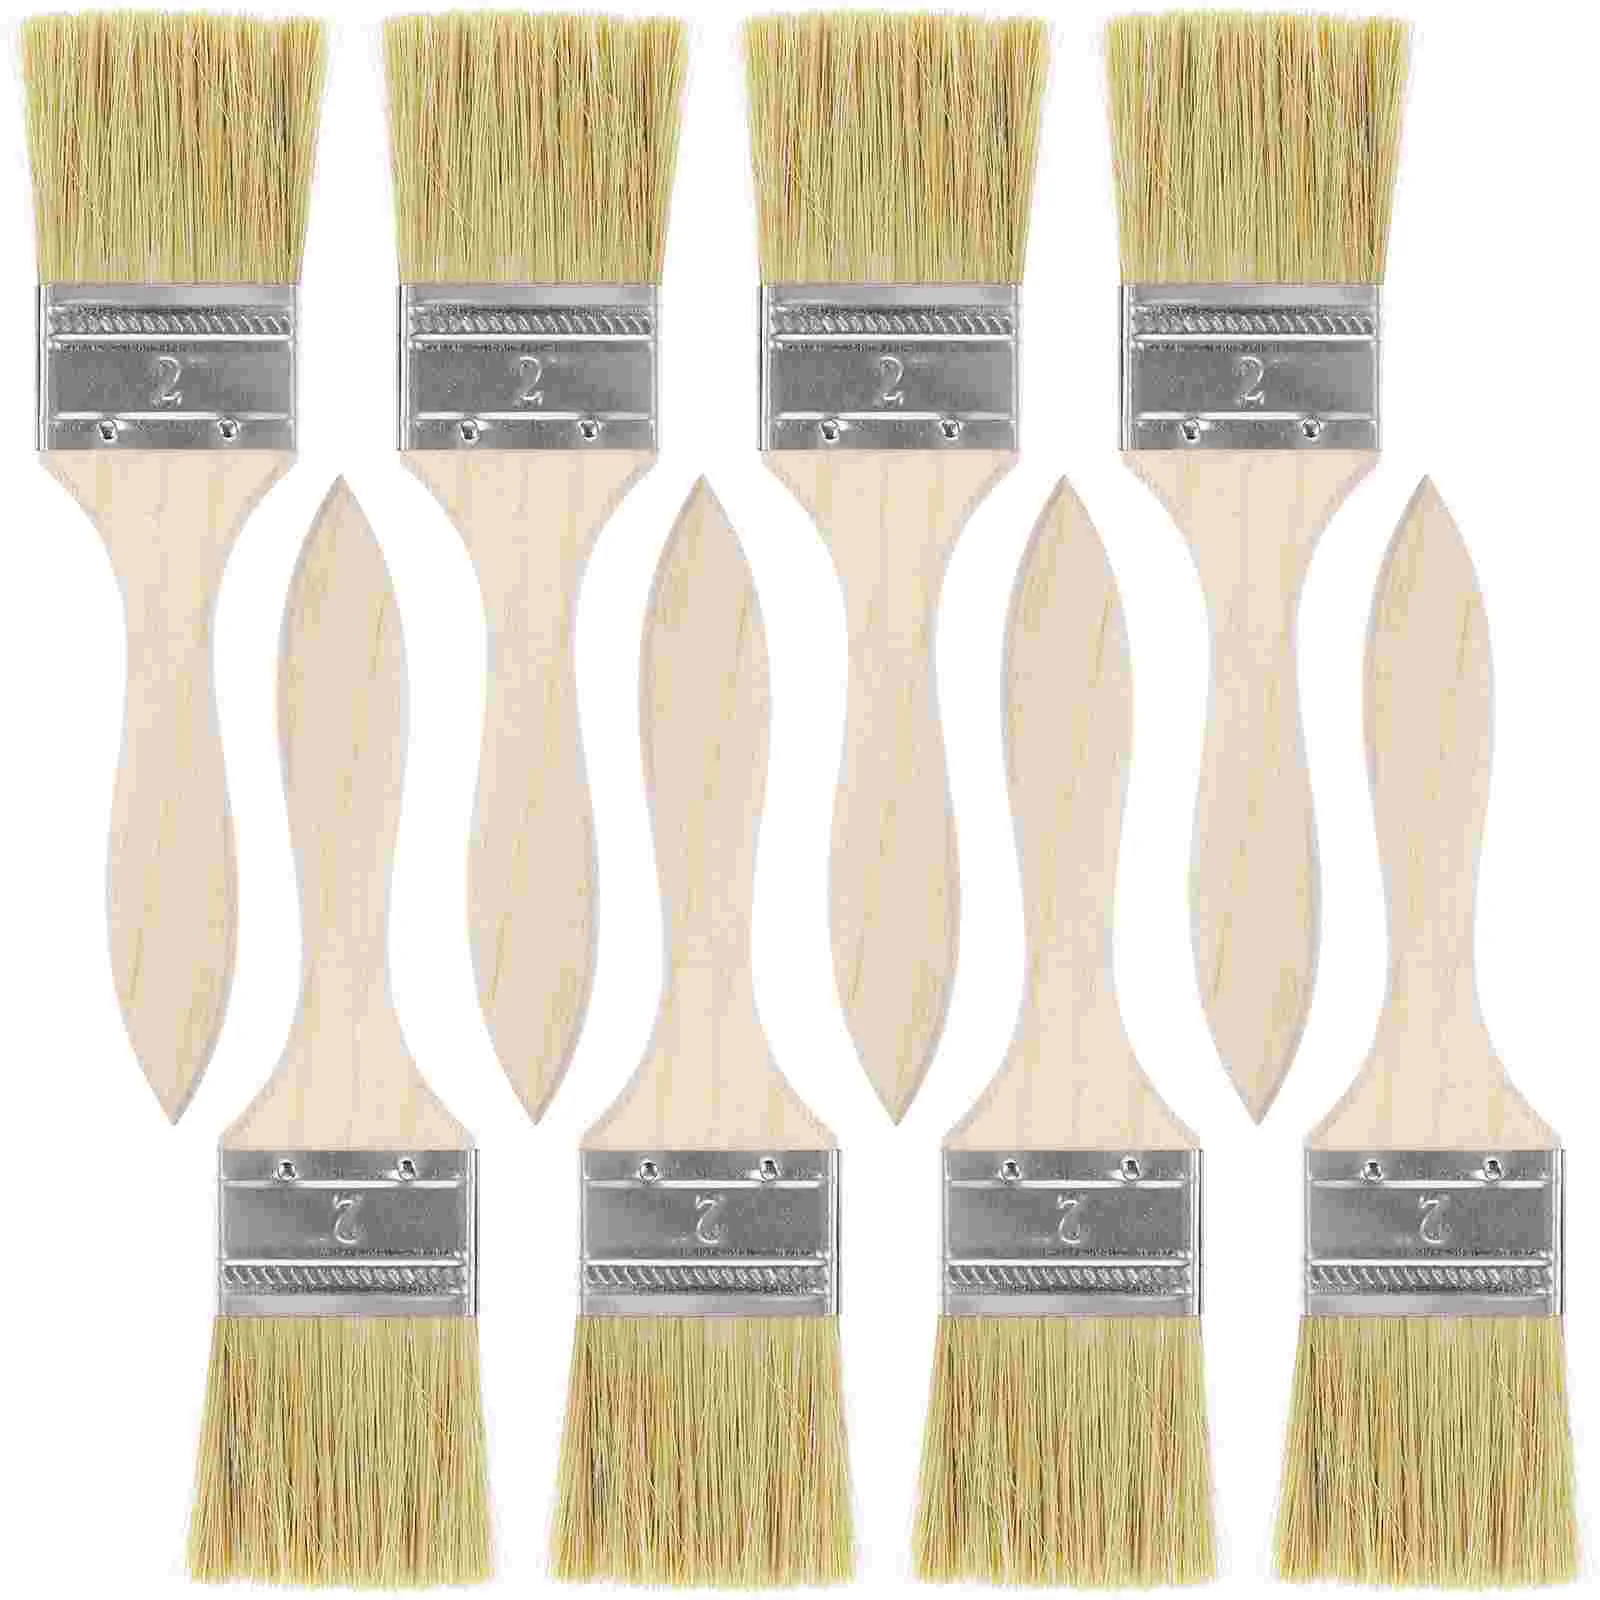 

23pcs Chip Brushes Wooden Handle Wall Furniture Painting Brush for Stains Varnishes Glues 2inch Acrylic oil Accessories